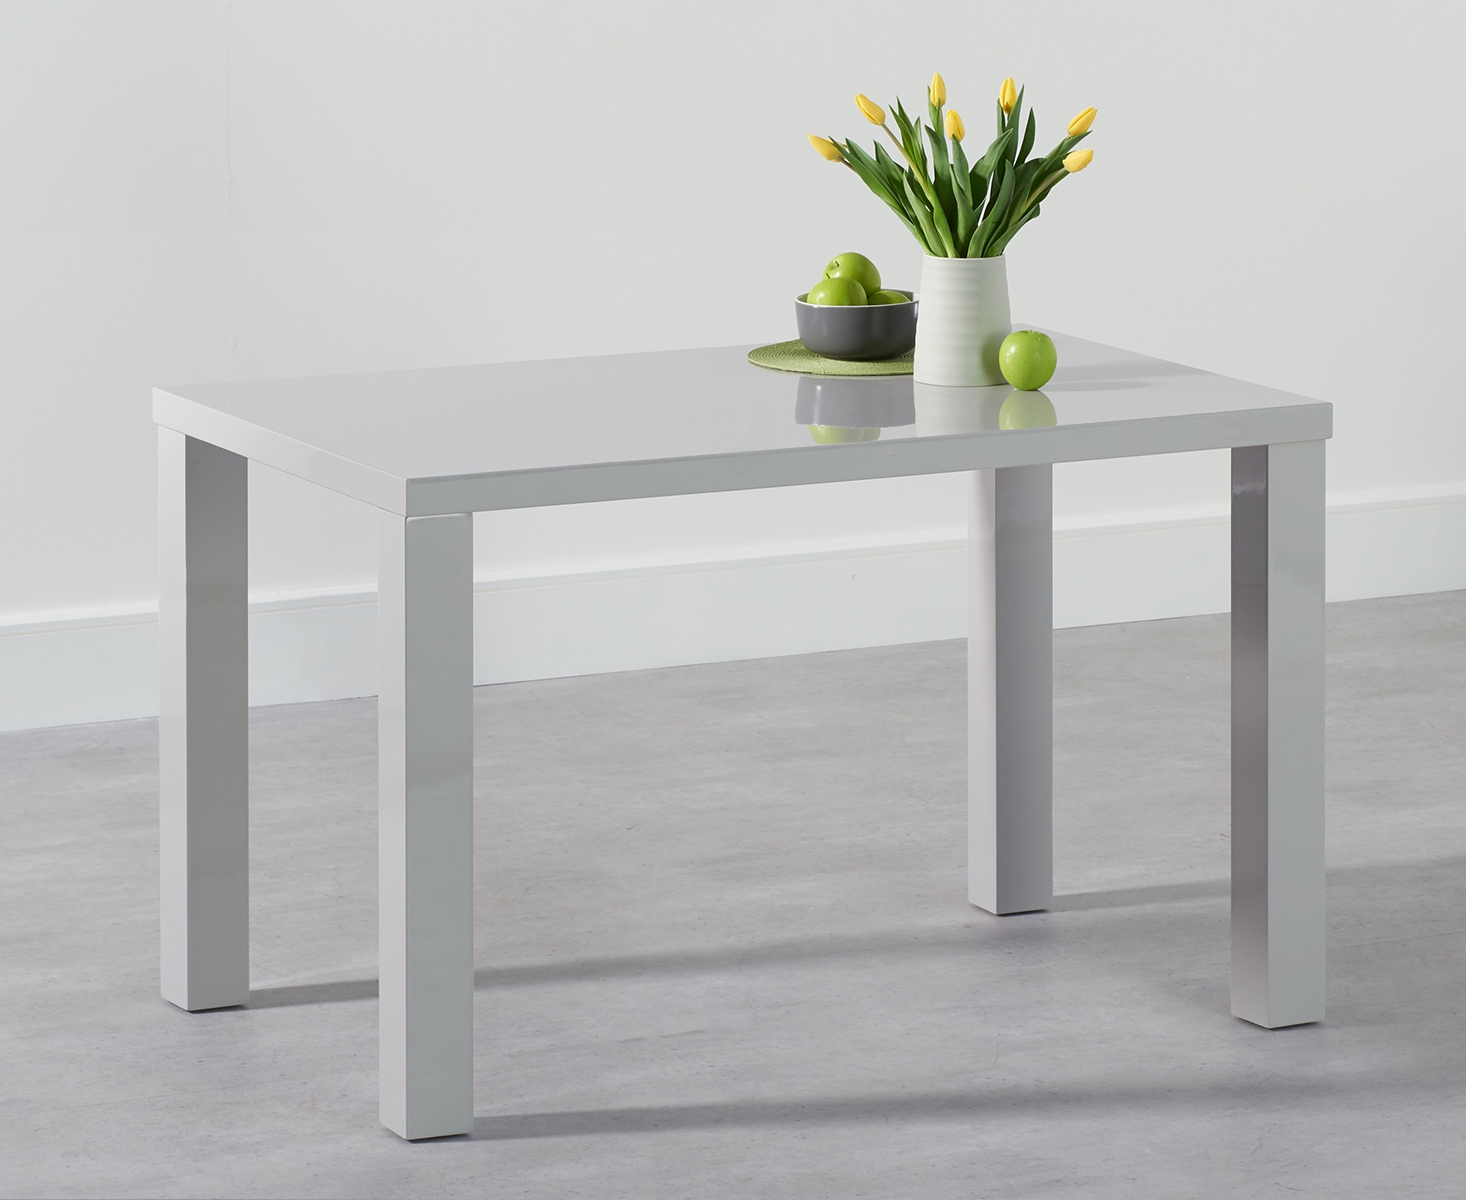 Photo 1 of Atlanta 120cm light grey high gloss dining table with austin benches